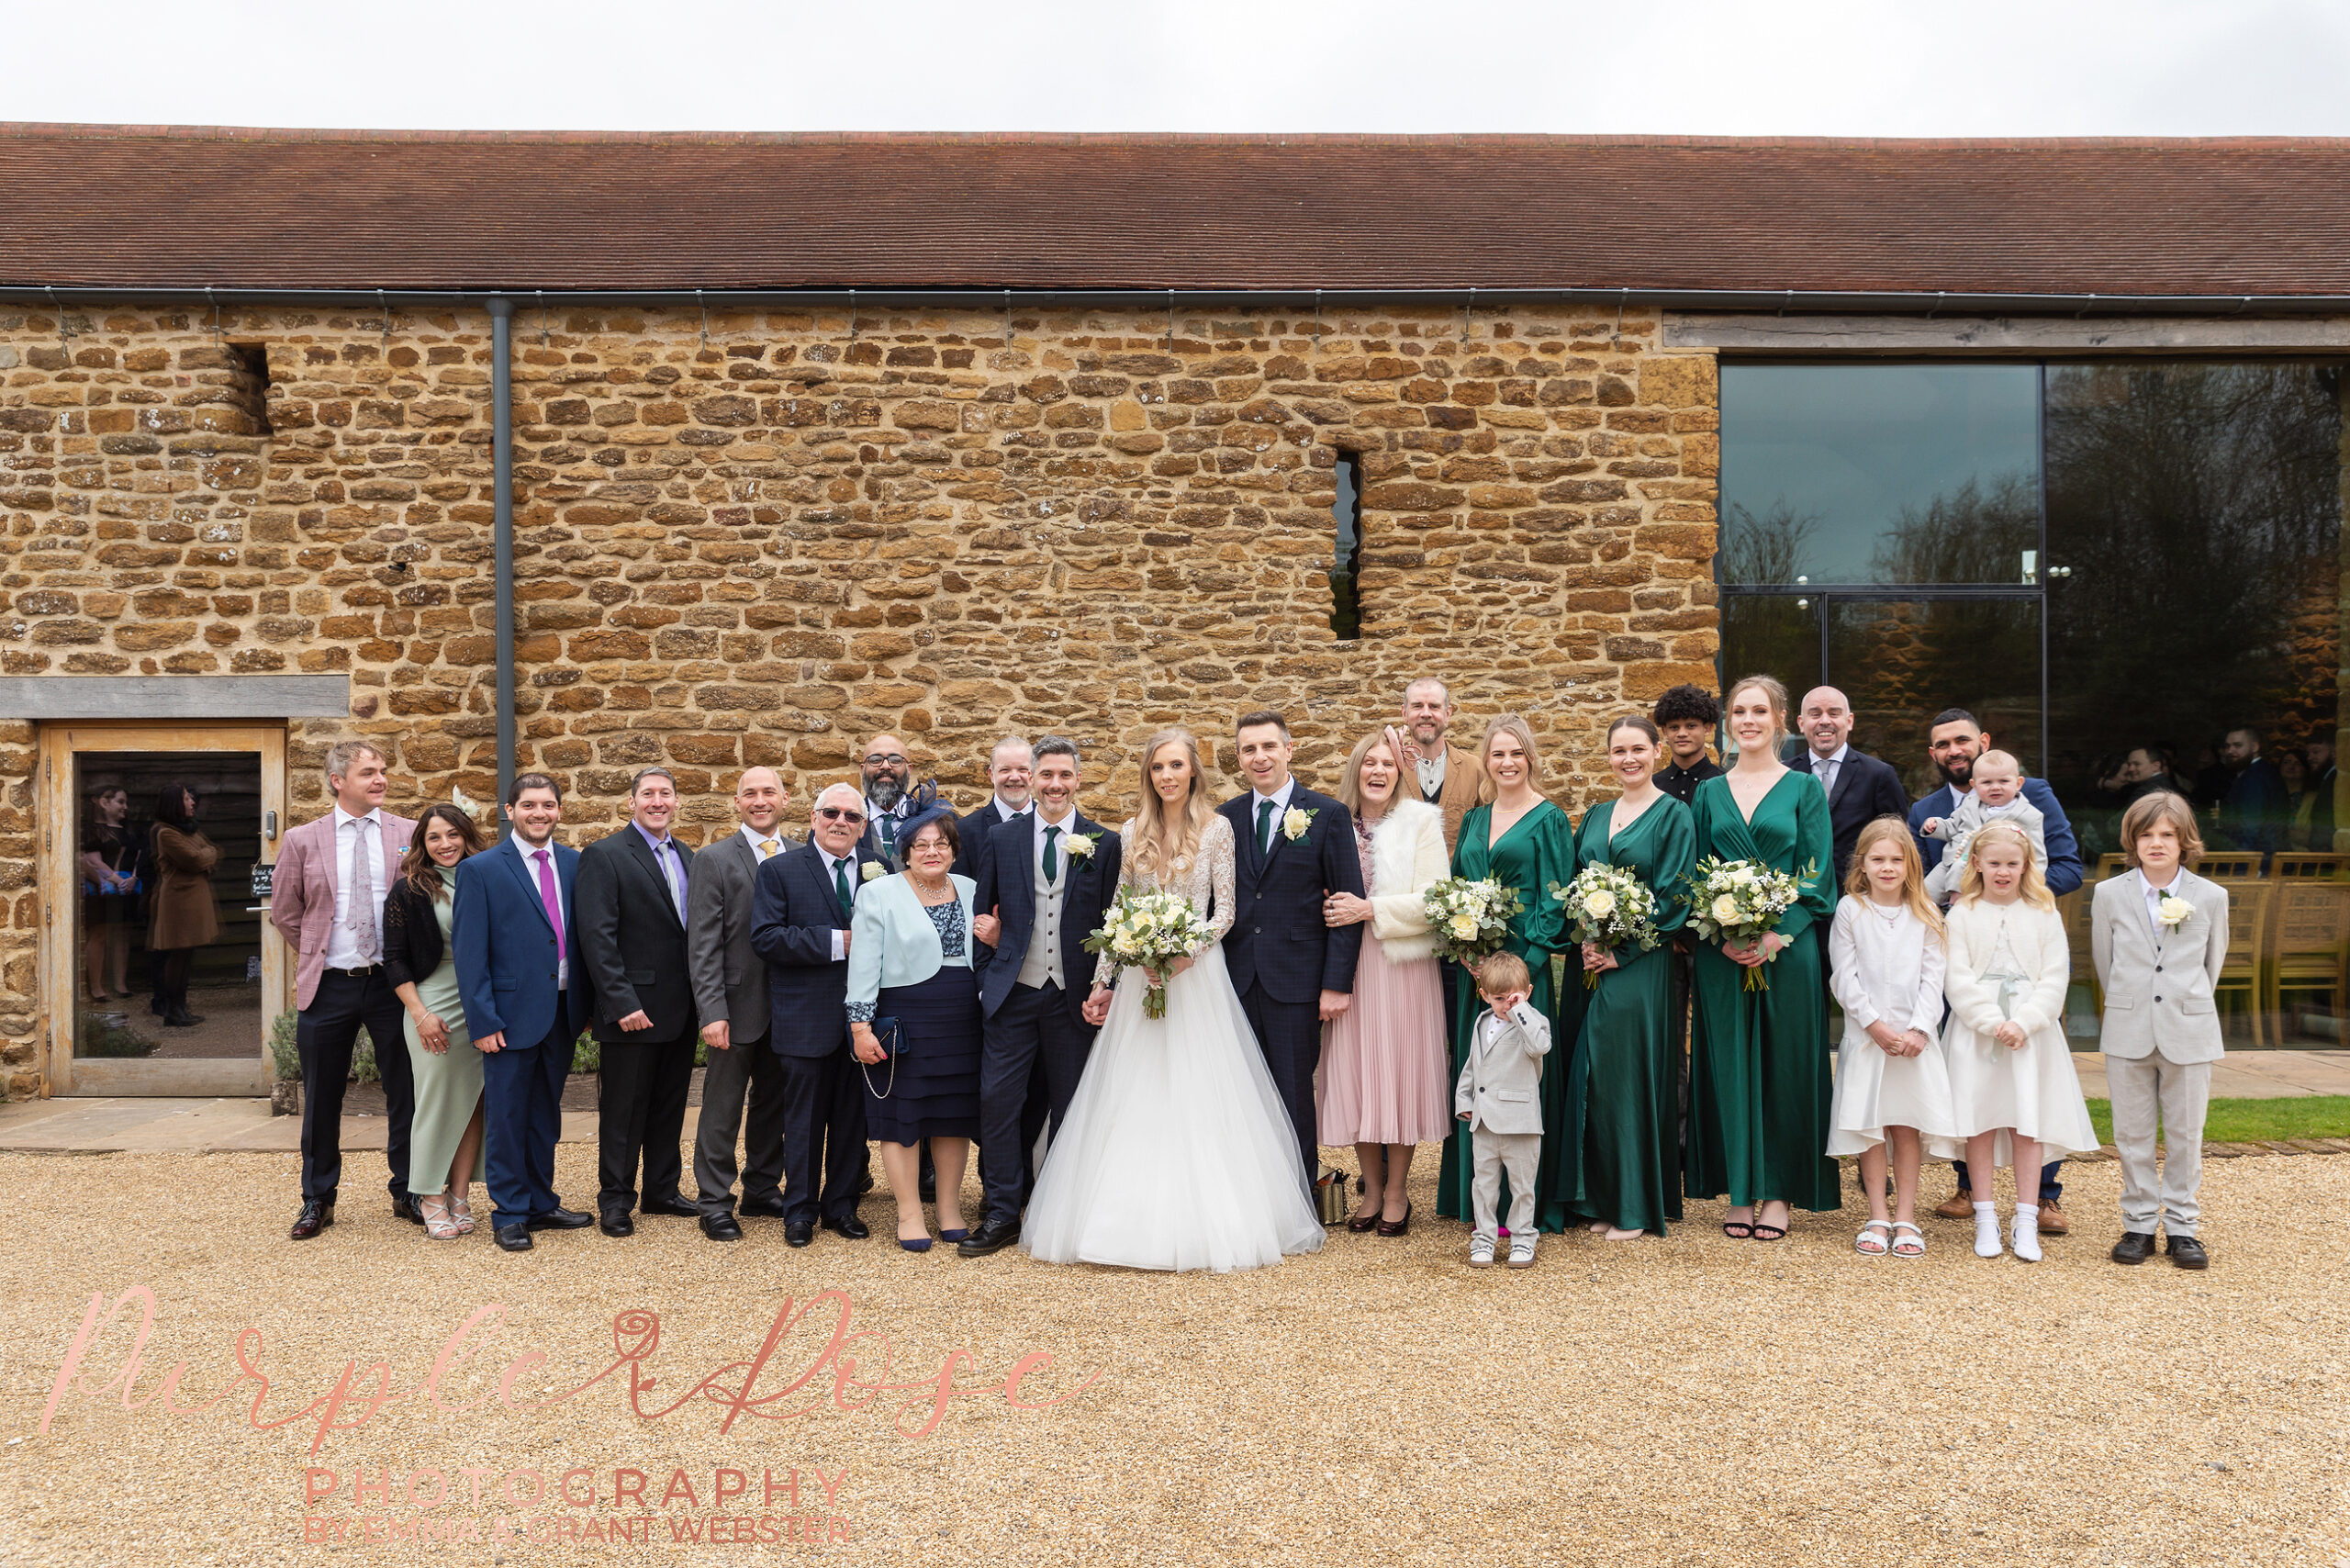 Large group photos of guests at a wedding in MIlton Keynes